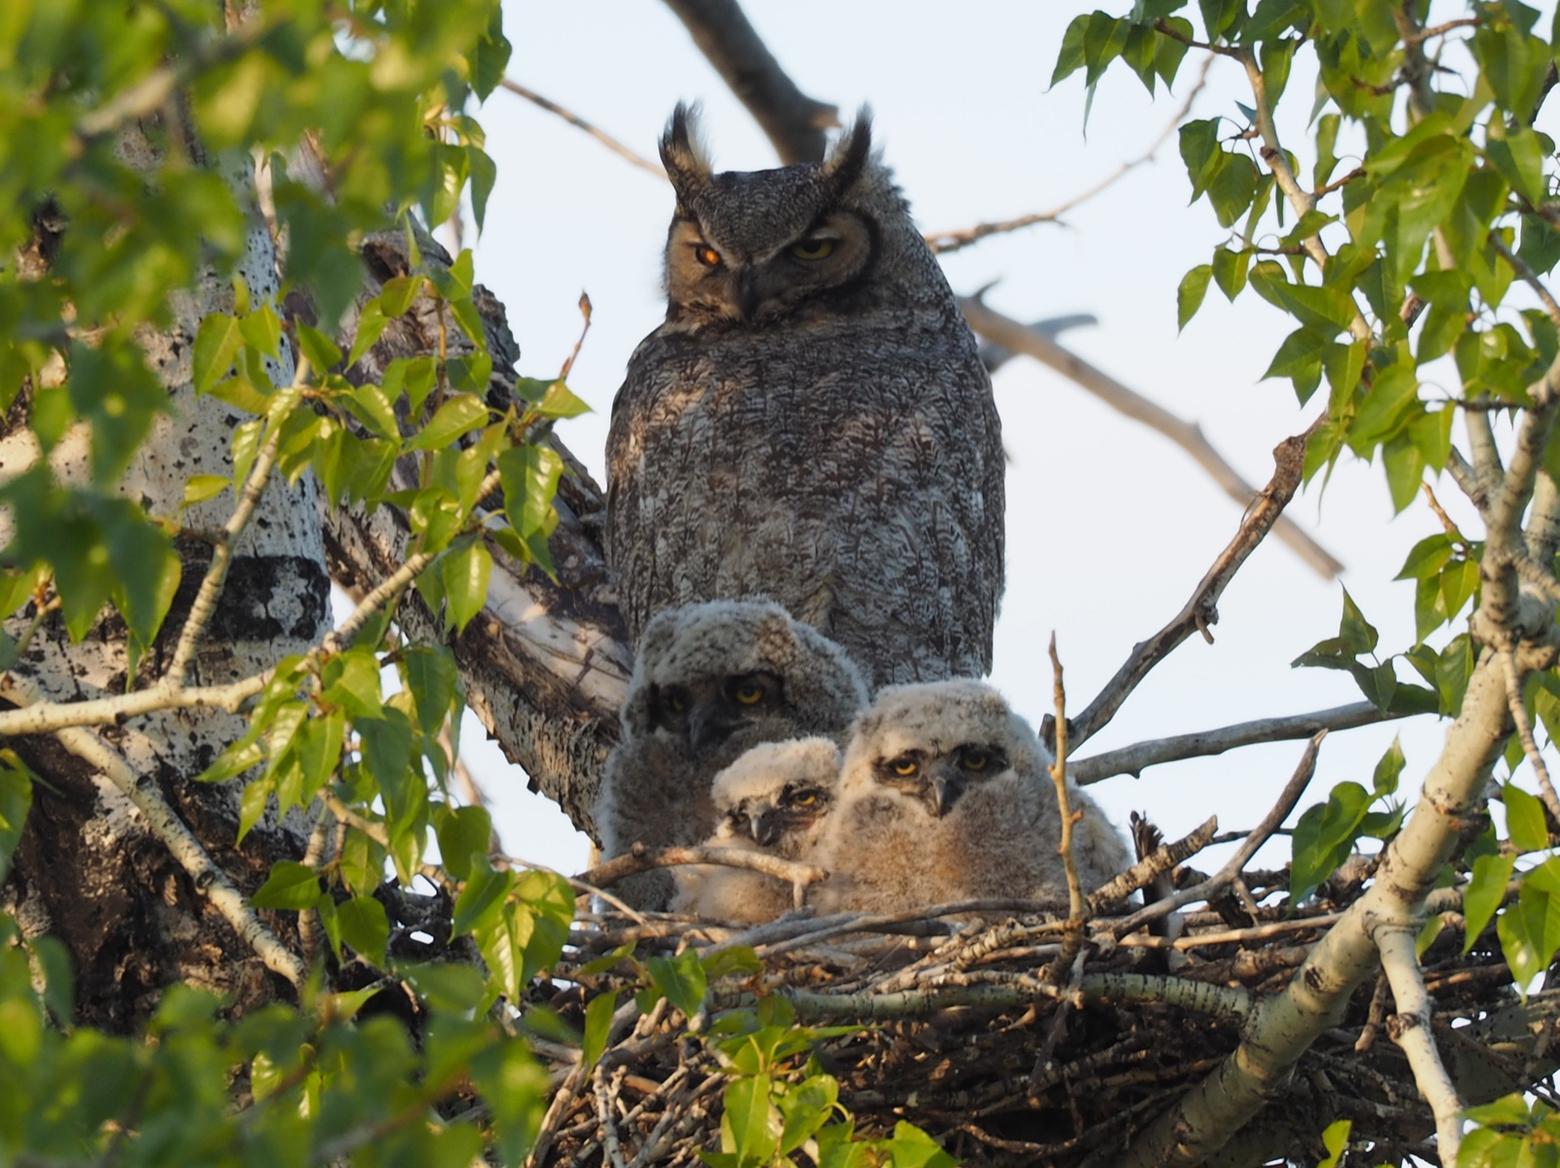 Mother and offspring. Photo by Tim Crawford